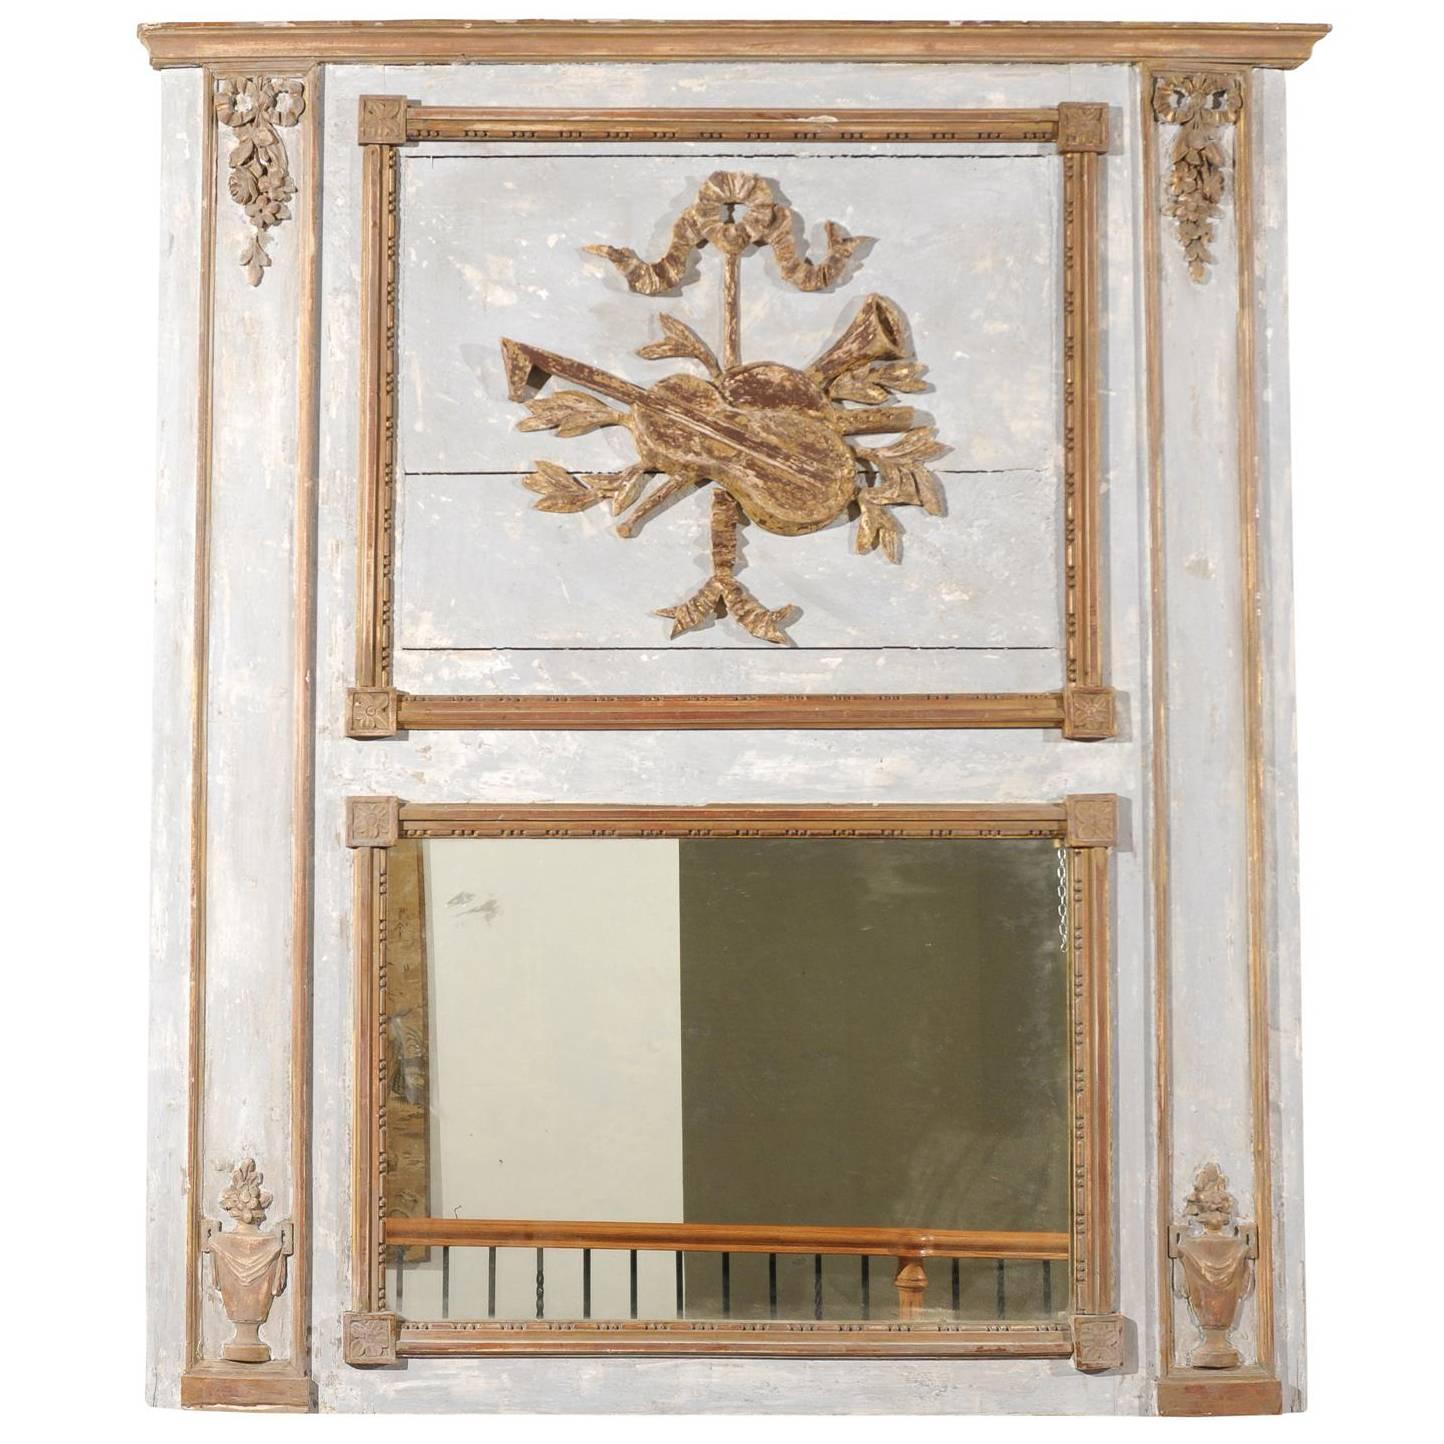 French 1890s Neoclassical Revival Trumeau Mirror with Musical Trophy and Urns